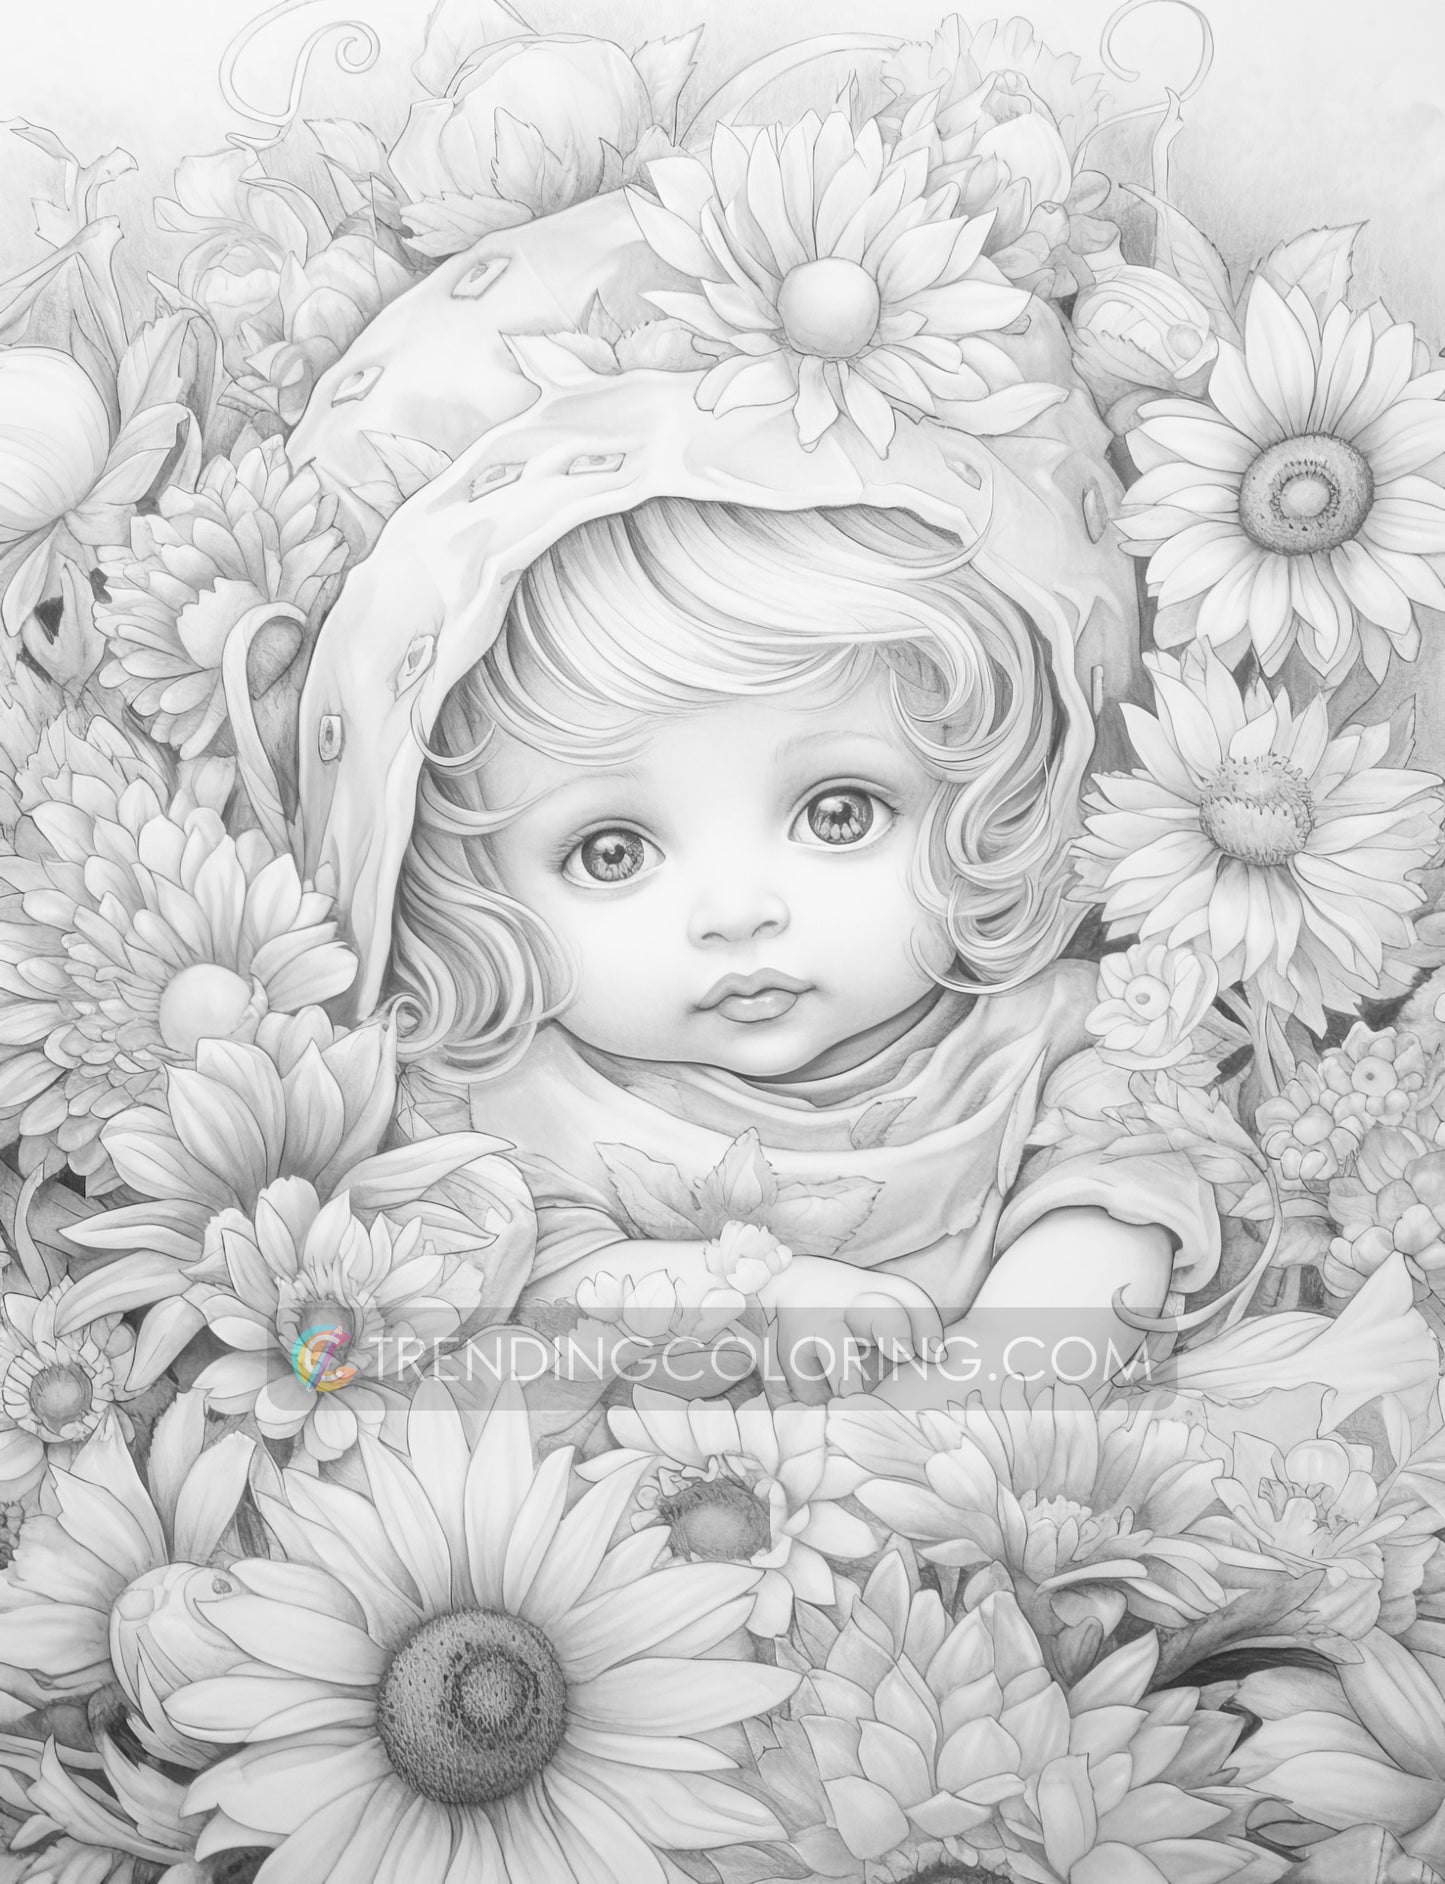 25 Adorable Flower Baby Grayscale Coloring Pages - Instant Download - Printable PDF Dark/Light